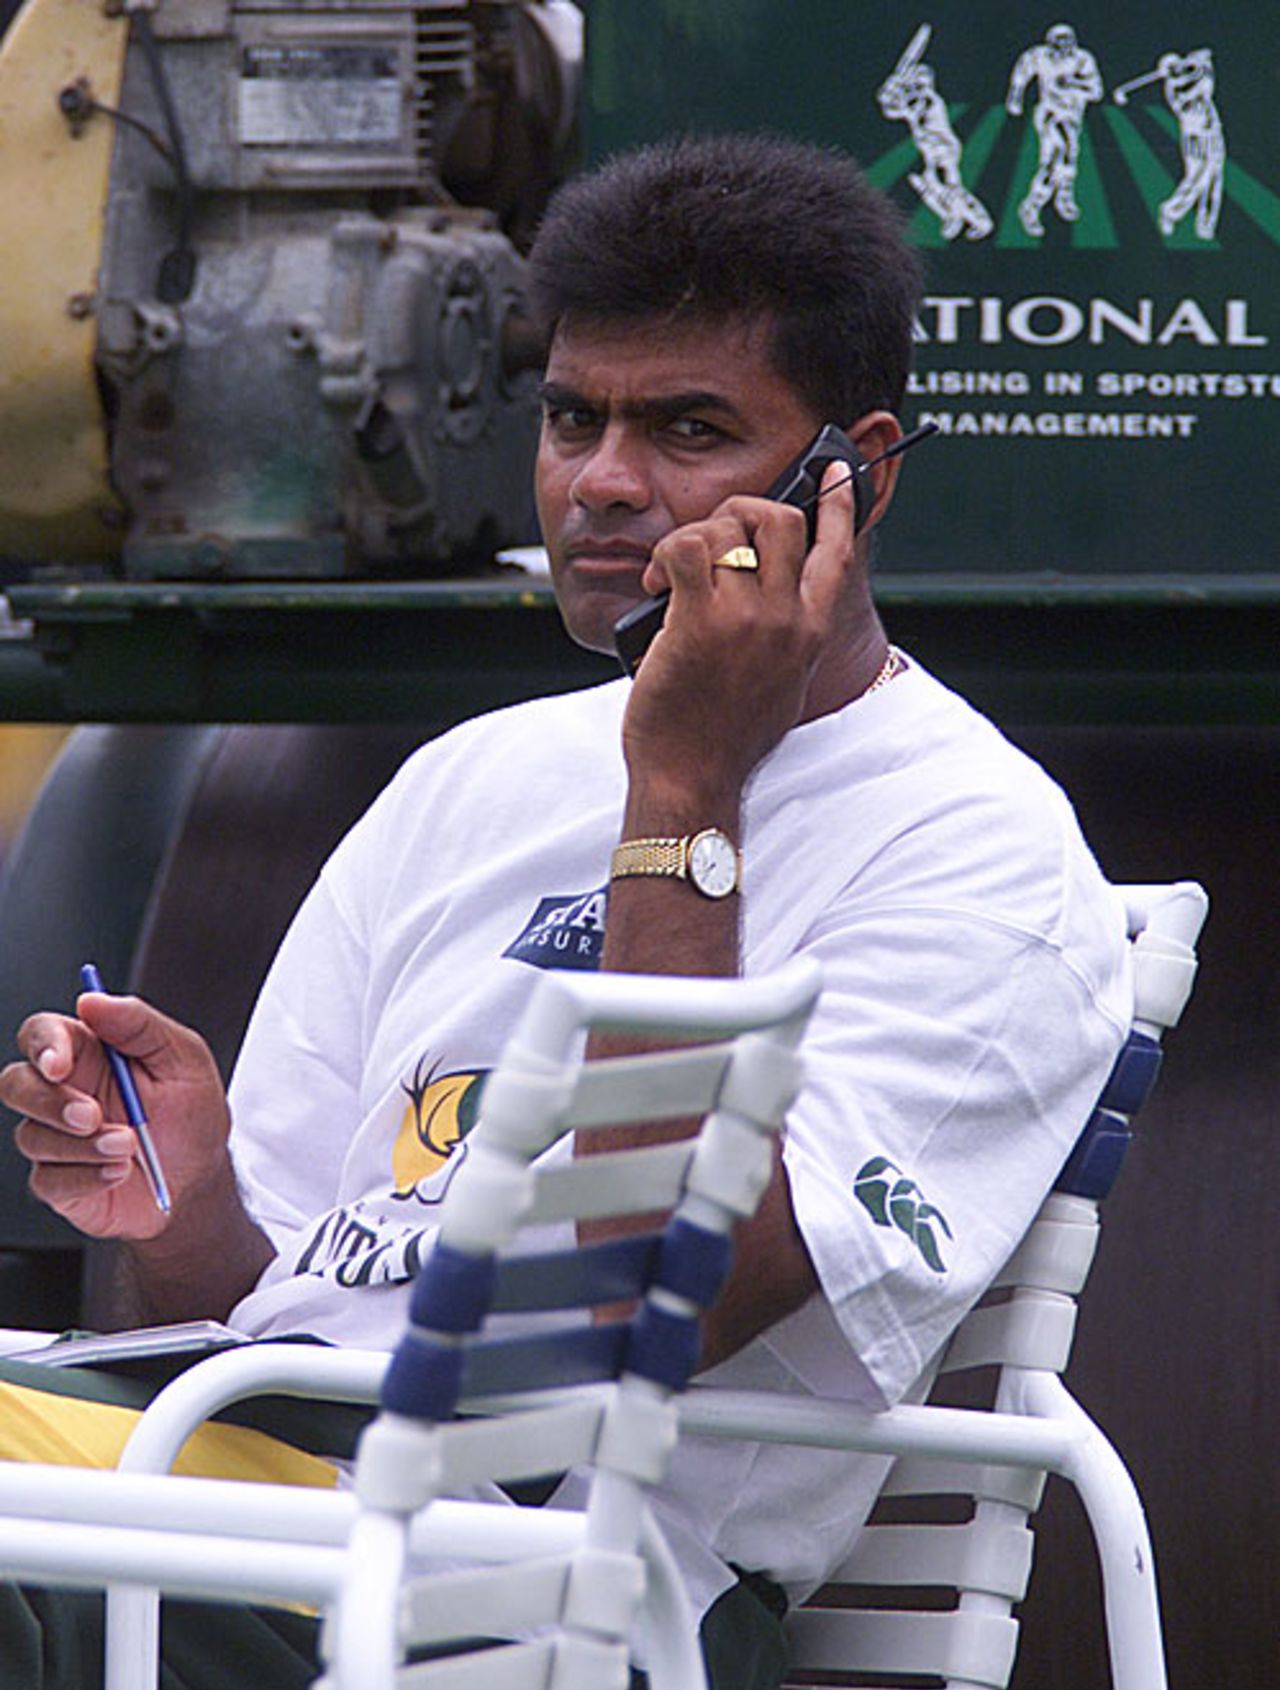 Central Districts coach Dipak Patel is busy on a call, Auckland, February 15, 2001